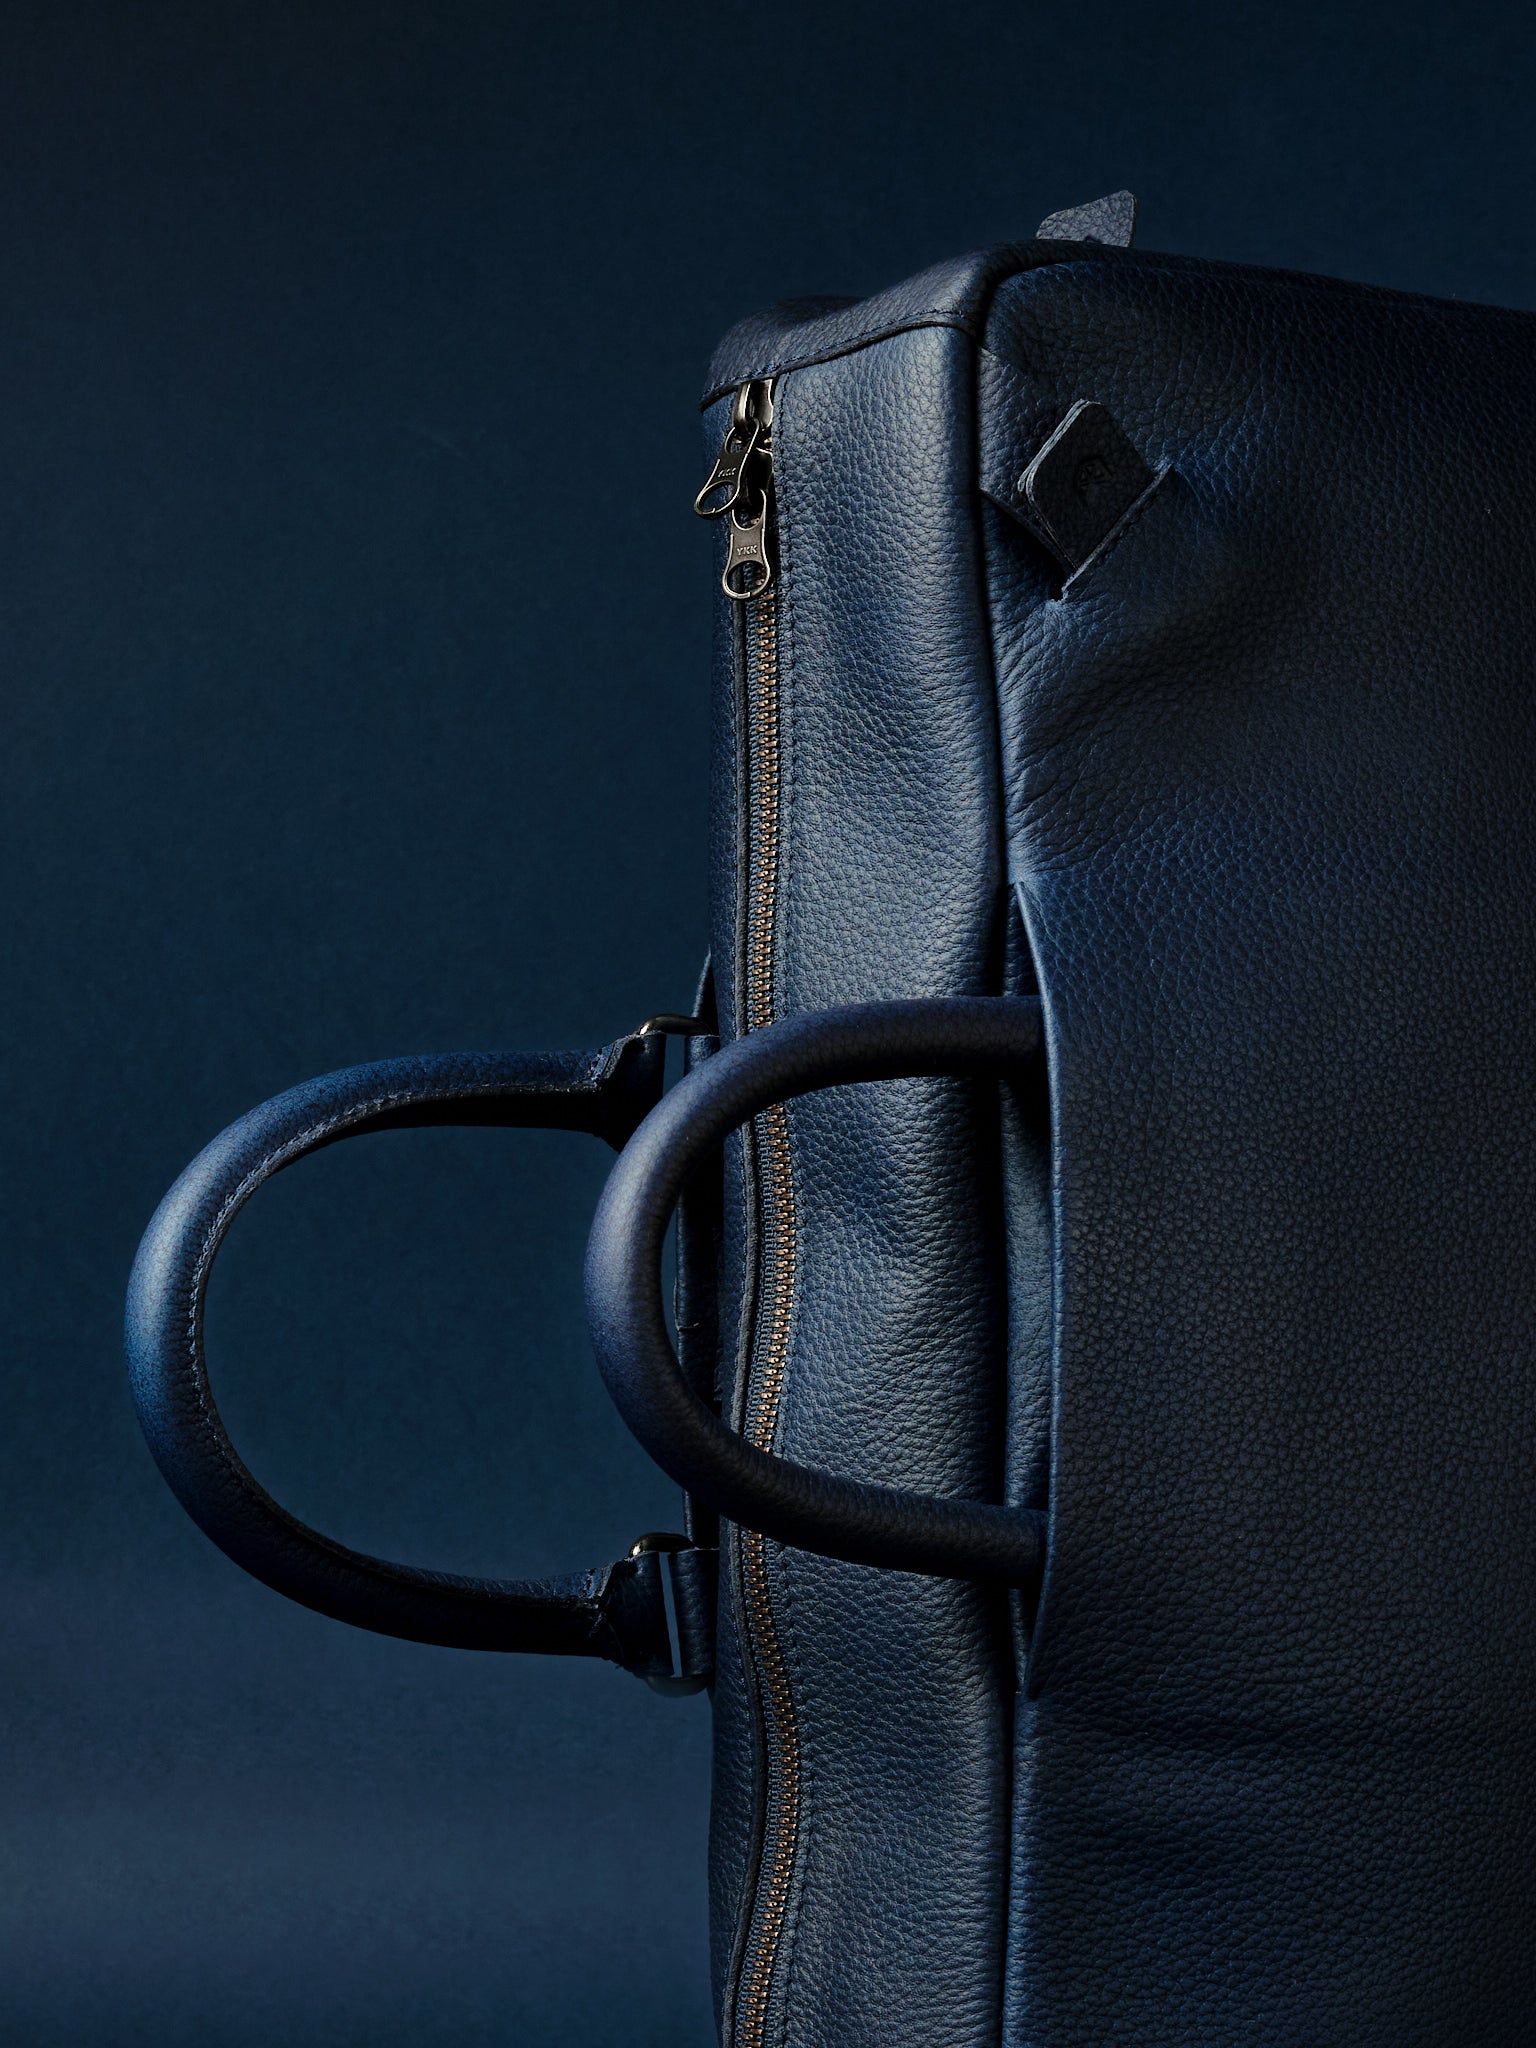 Sleek Cylindrical Handles. Hybrid Backpack Briefcase Navy by Capra Leather